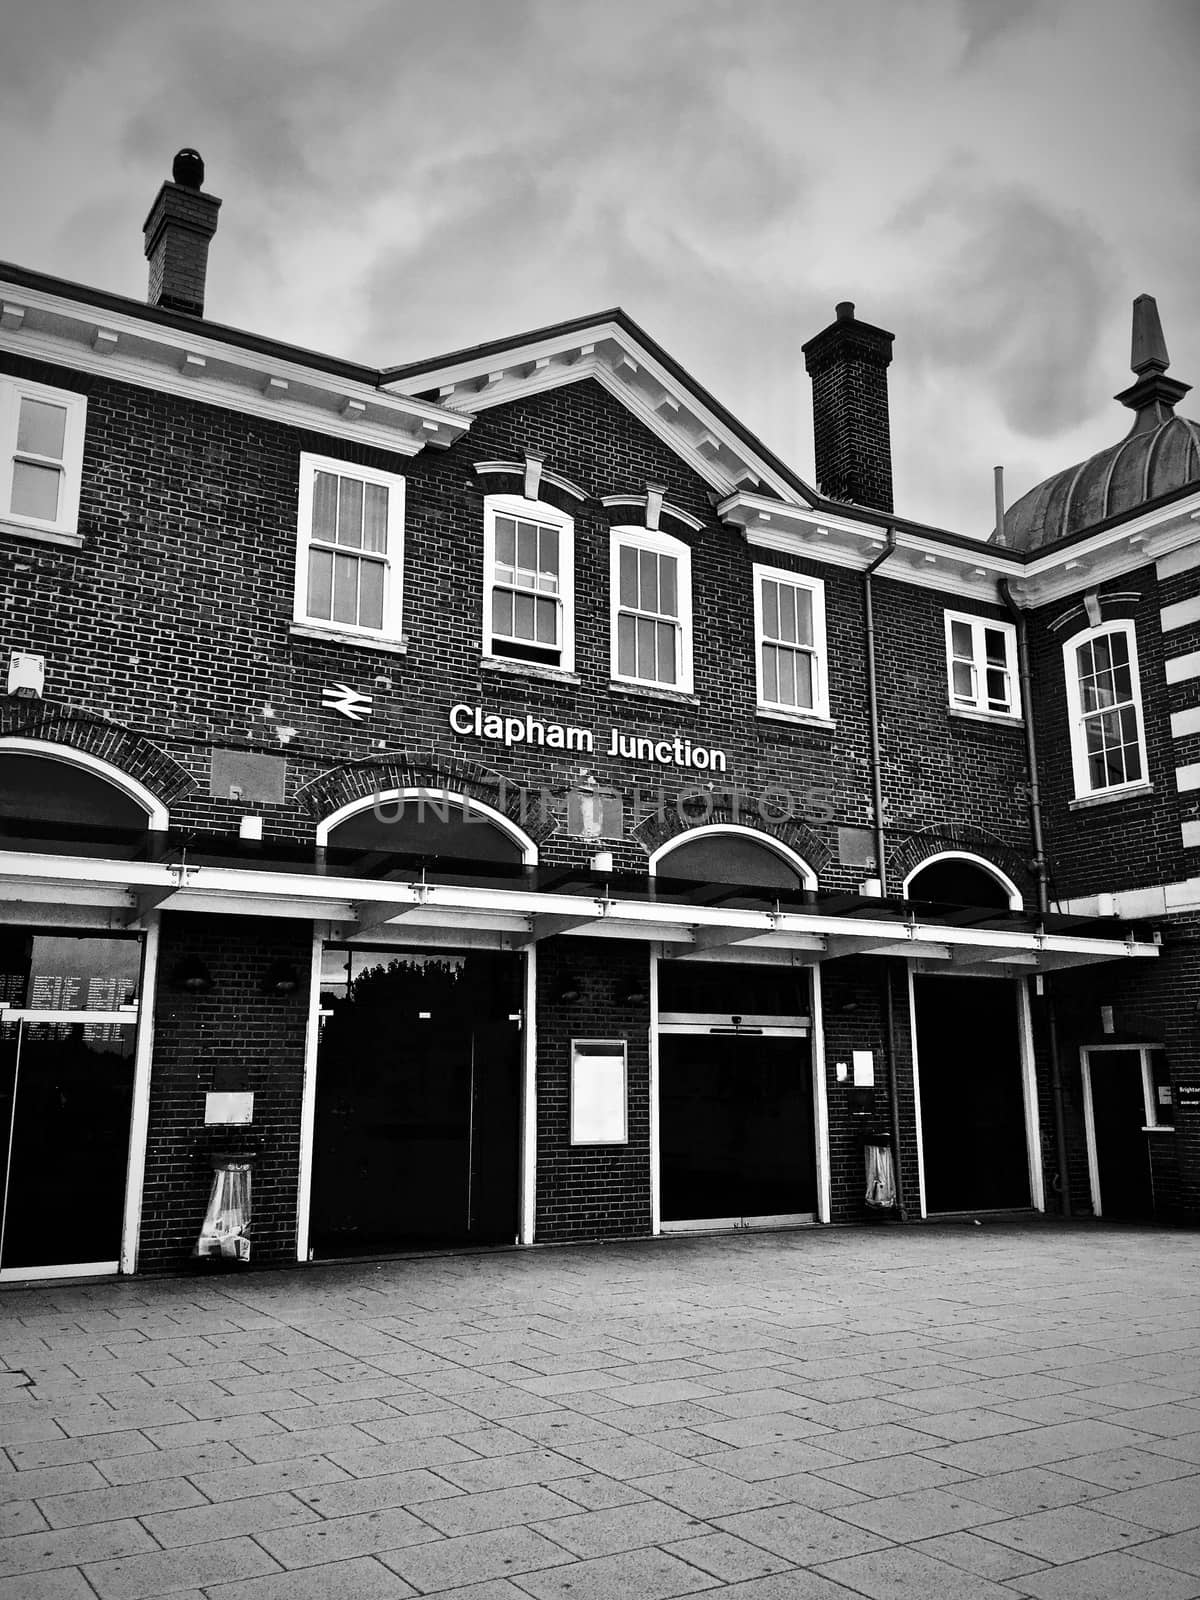 Train station in Clapham Junction, London. Old brick buildings. Architecture. Black and white photography.